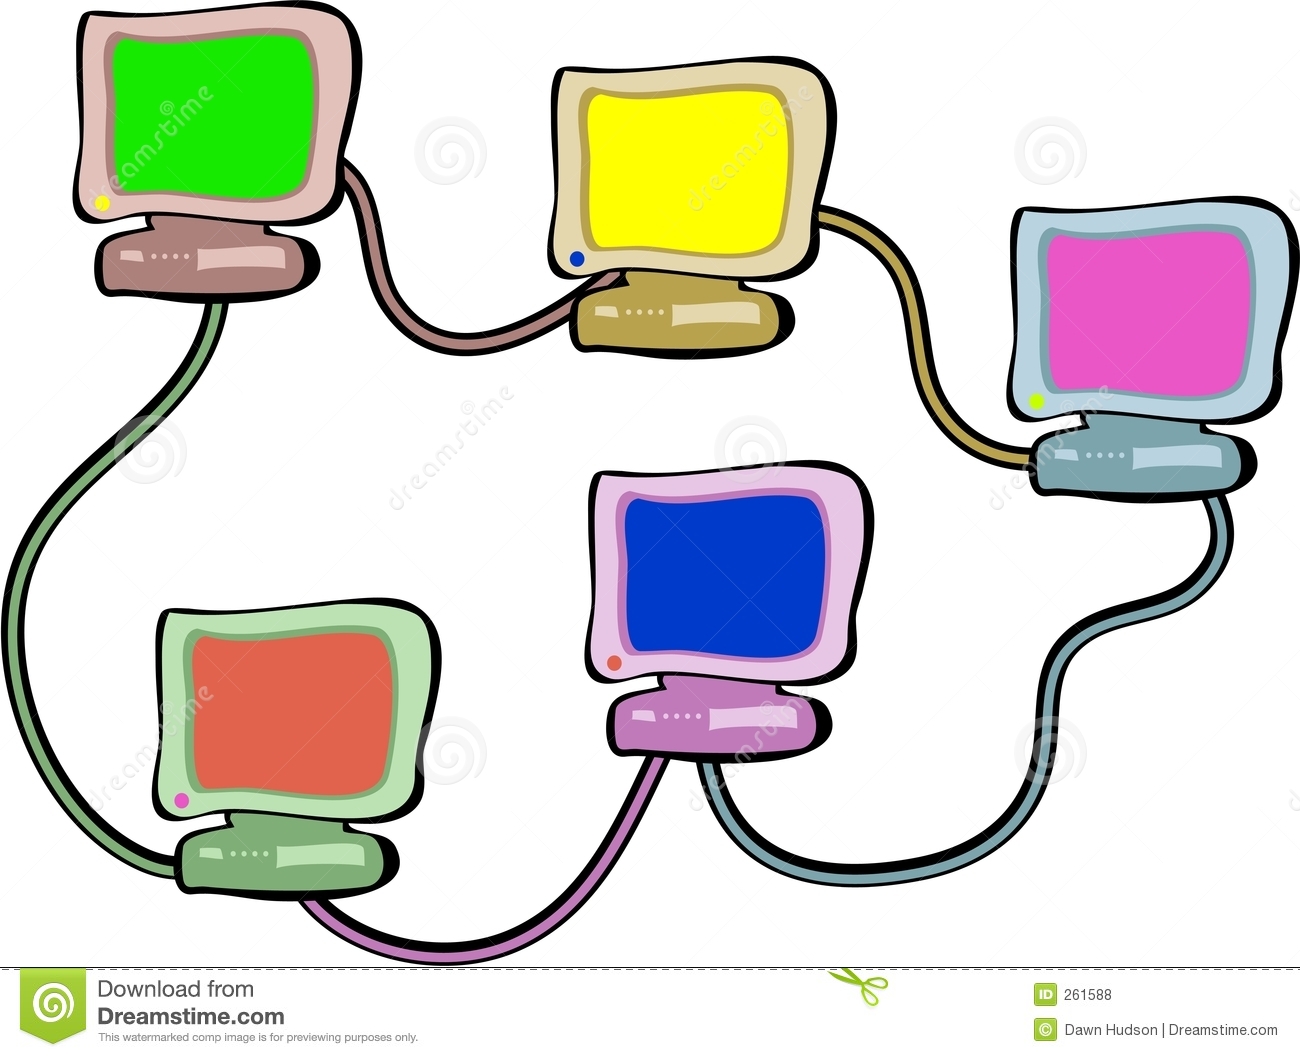 networking clipart